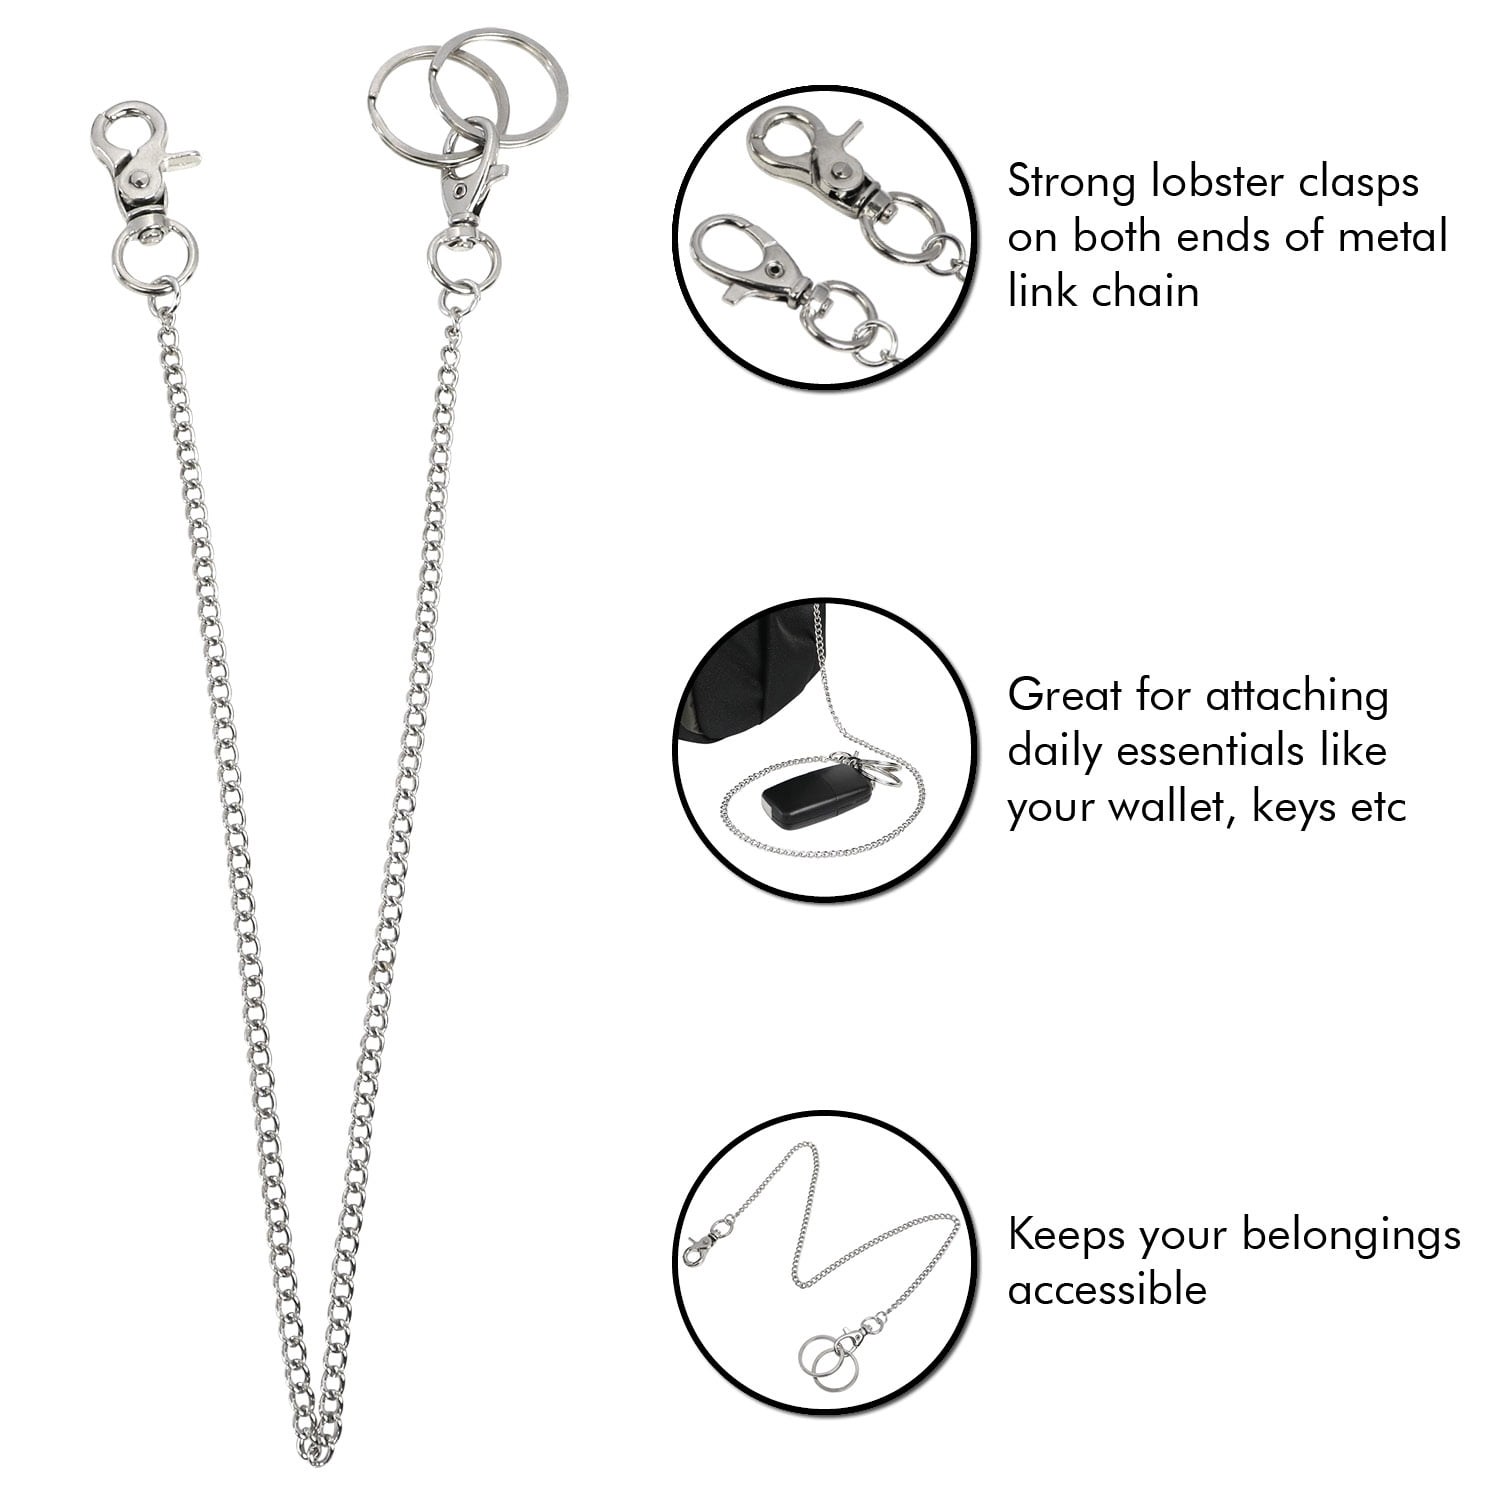 Aylifu Pocket Chain, 2 Pieces of Metal Wallet Keychain Pants Chain with Both Ends Lobster Clasps and 6 Pieces of Key Rings for Keys, Pants, Belt Loop